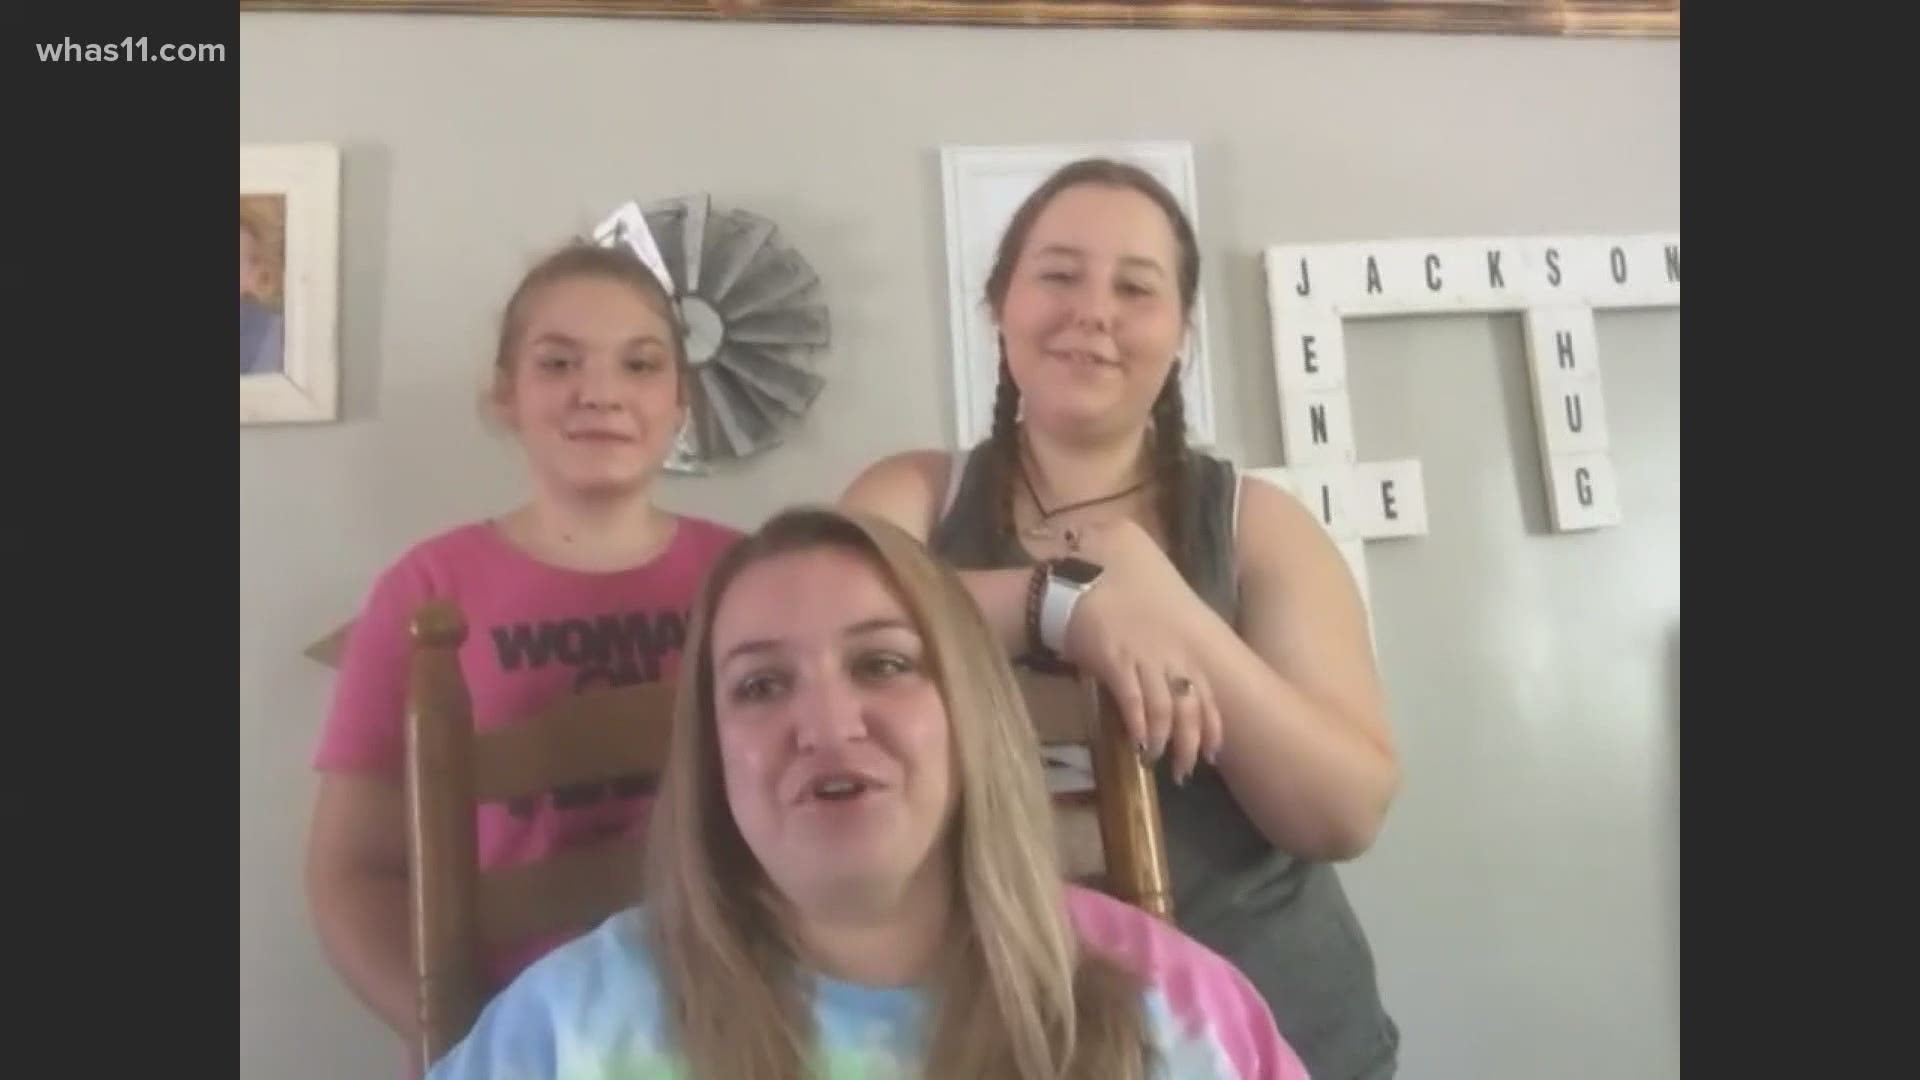 One Kentucky family decided to do a humorous end-of-year celebration with some creative awards.